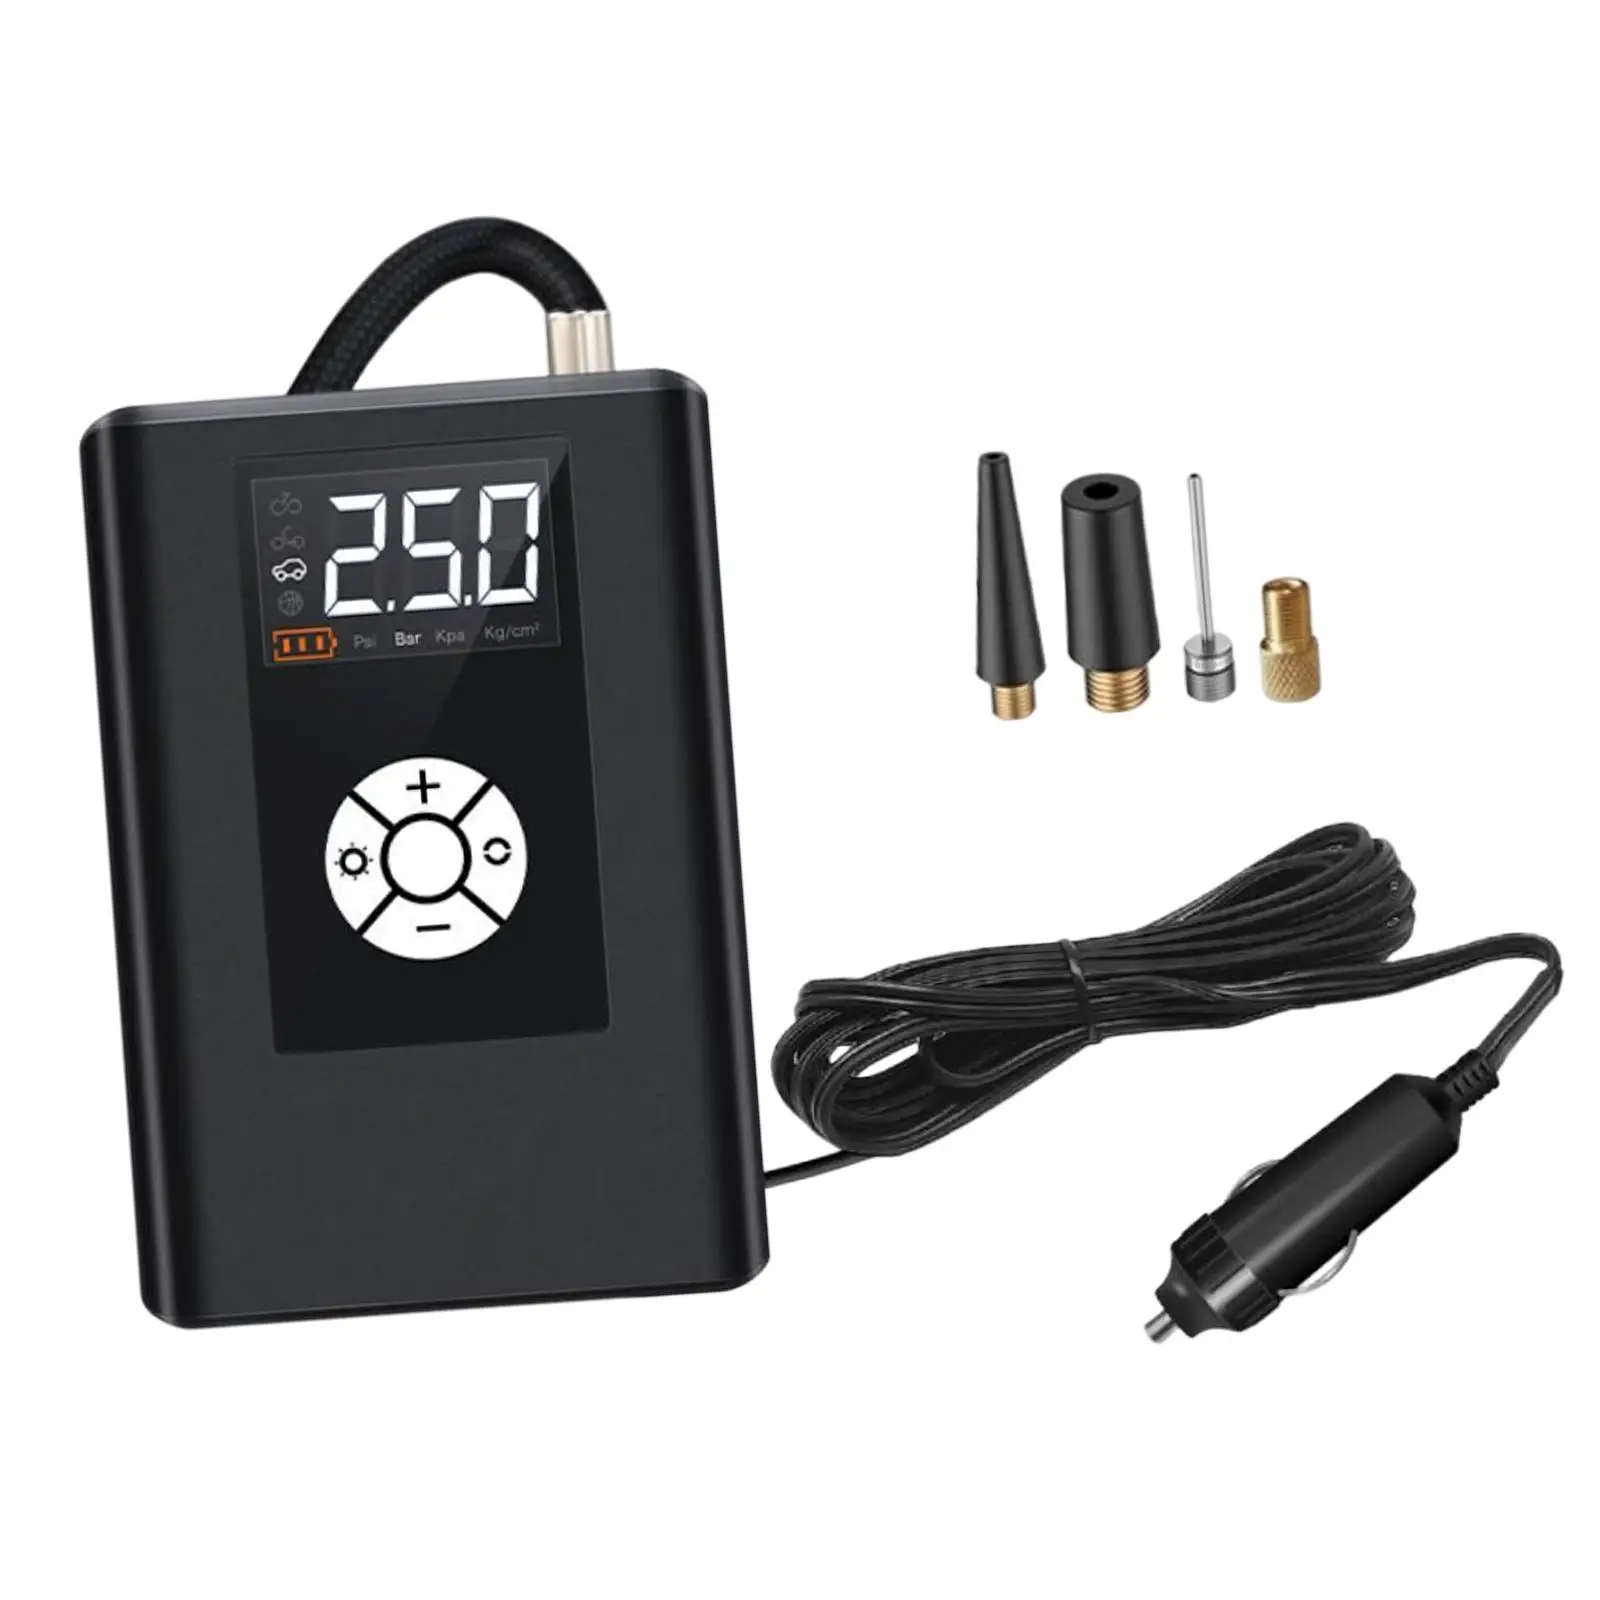 Car Air Tire Pump 150PSI with Emergency LED Lights LCD Display Durable Multi Purpose